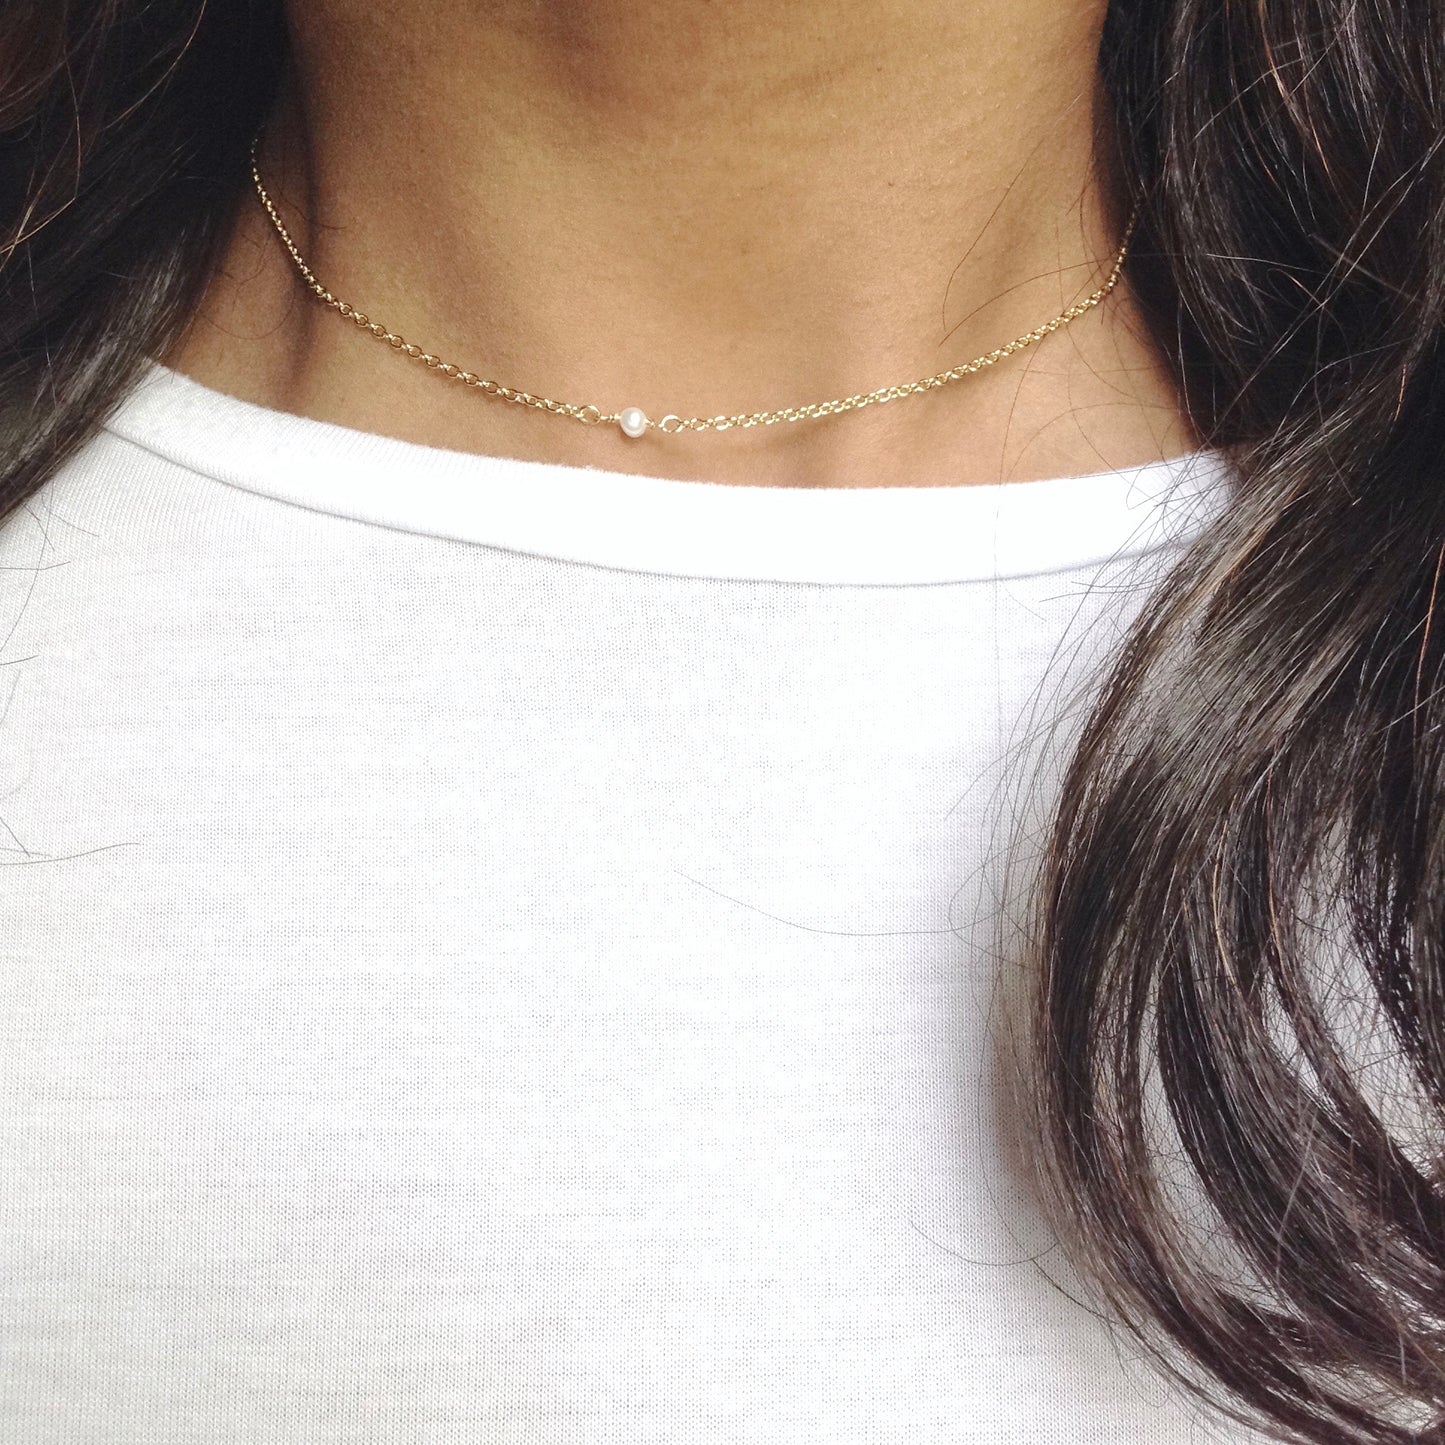 Sister Gift Tiny Single Pearl Necklace | Meaningful Necklace | IB Jewelry